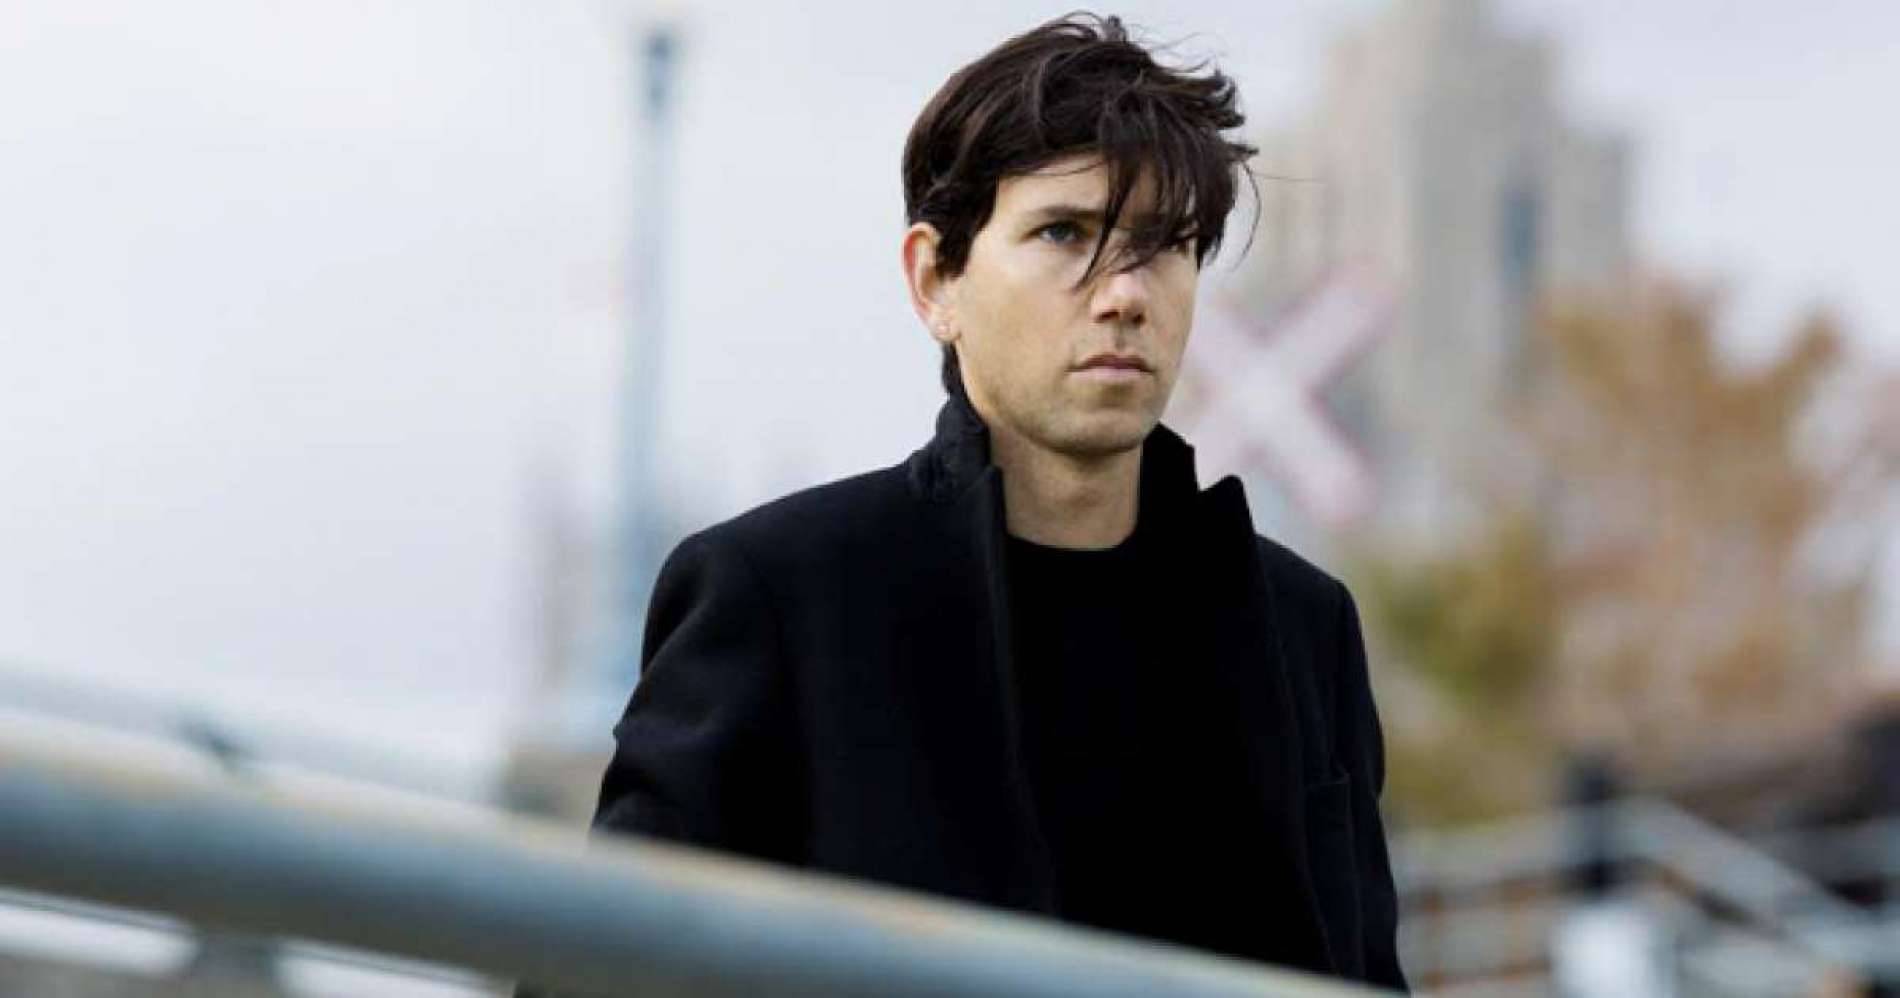 Tiga asks you to 'Make Me Fall In Love'